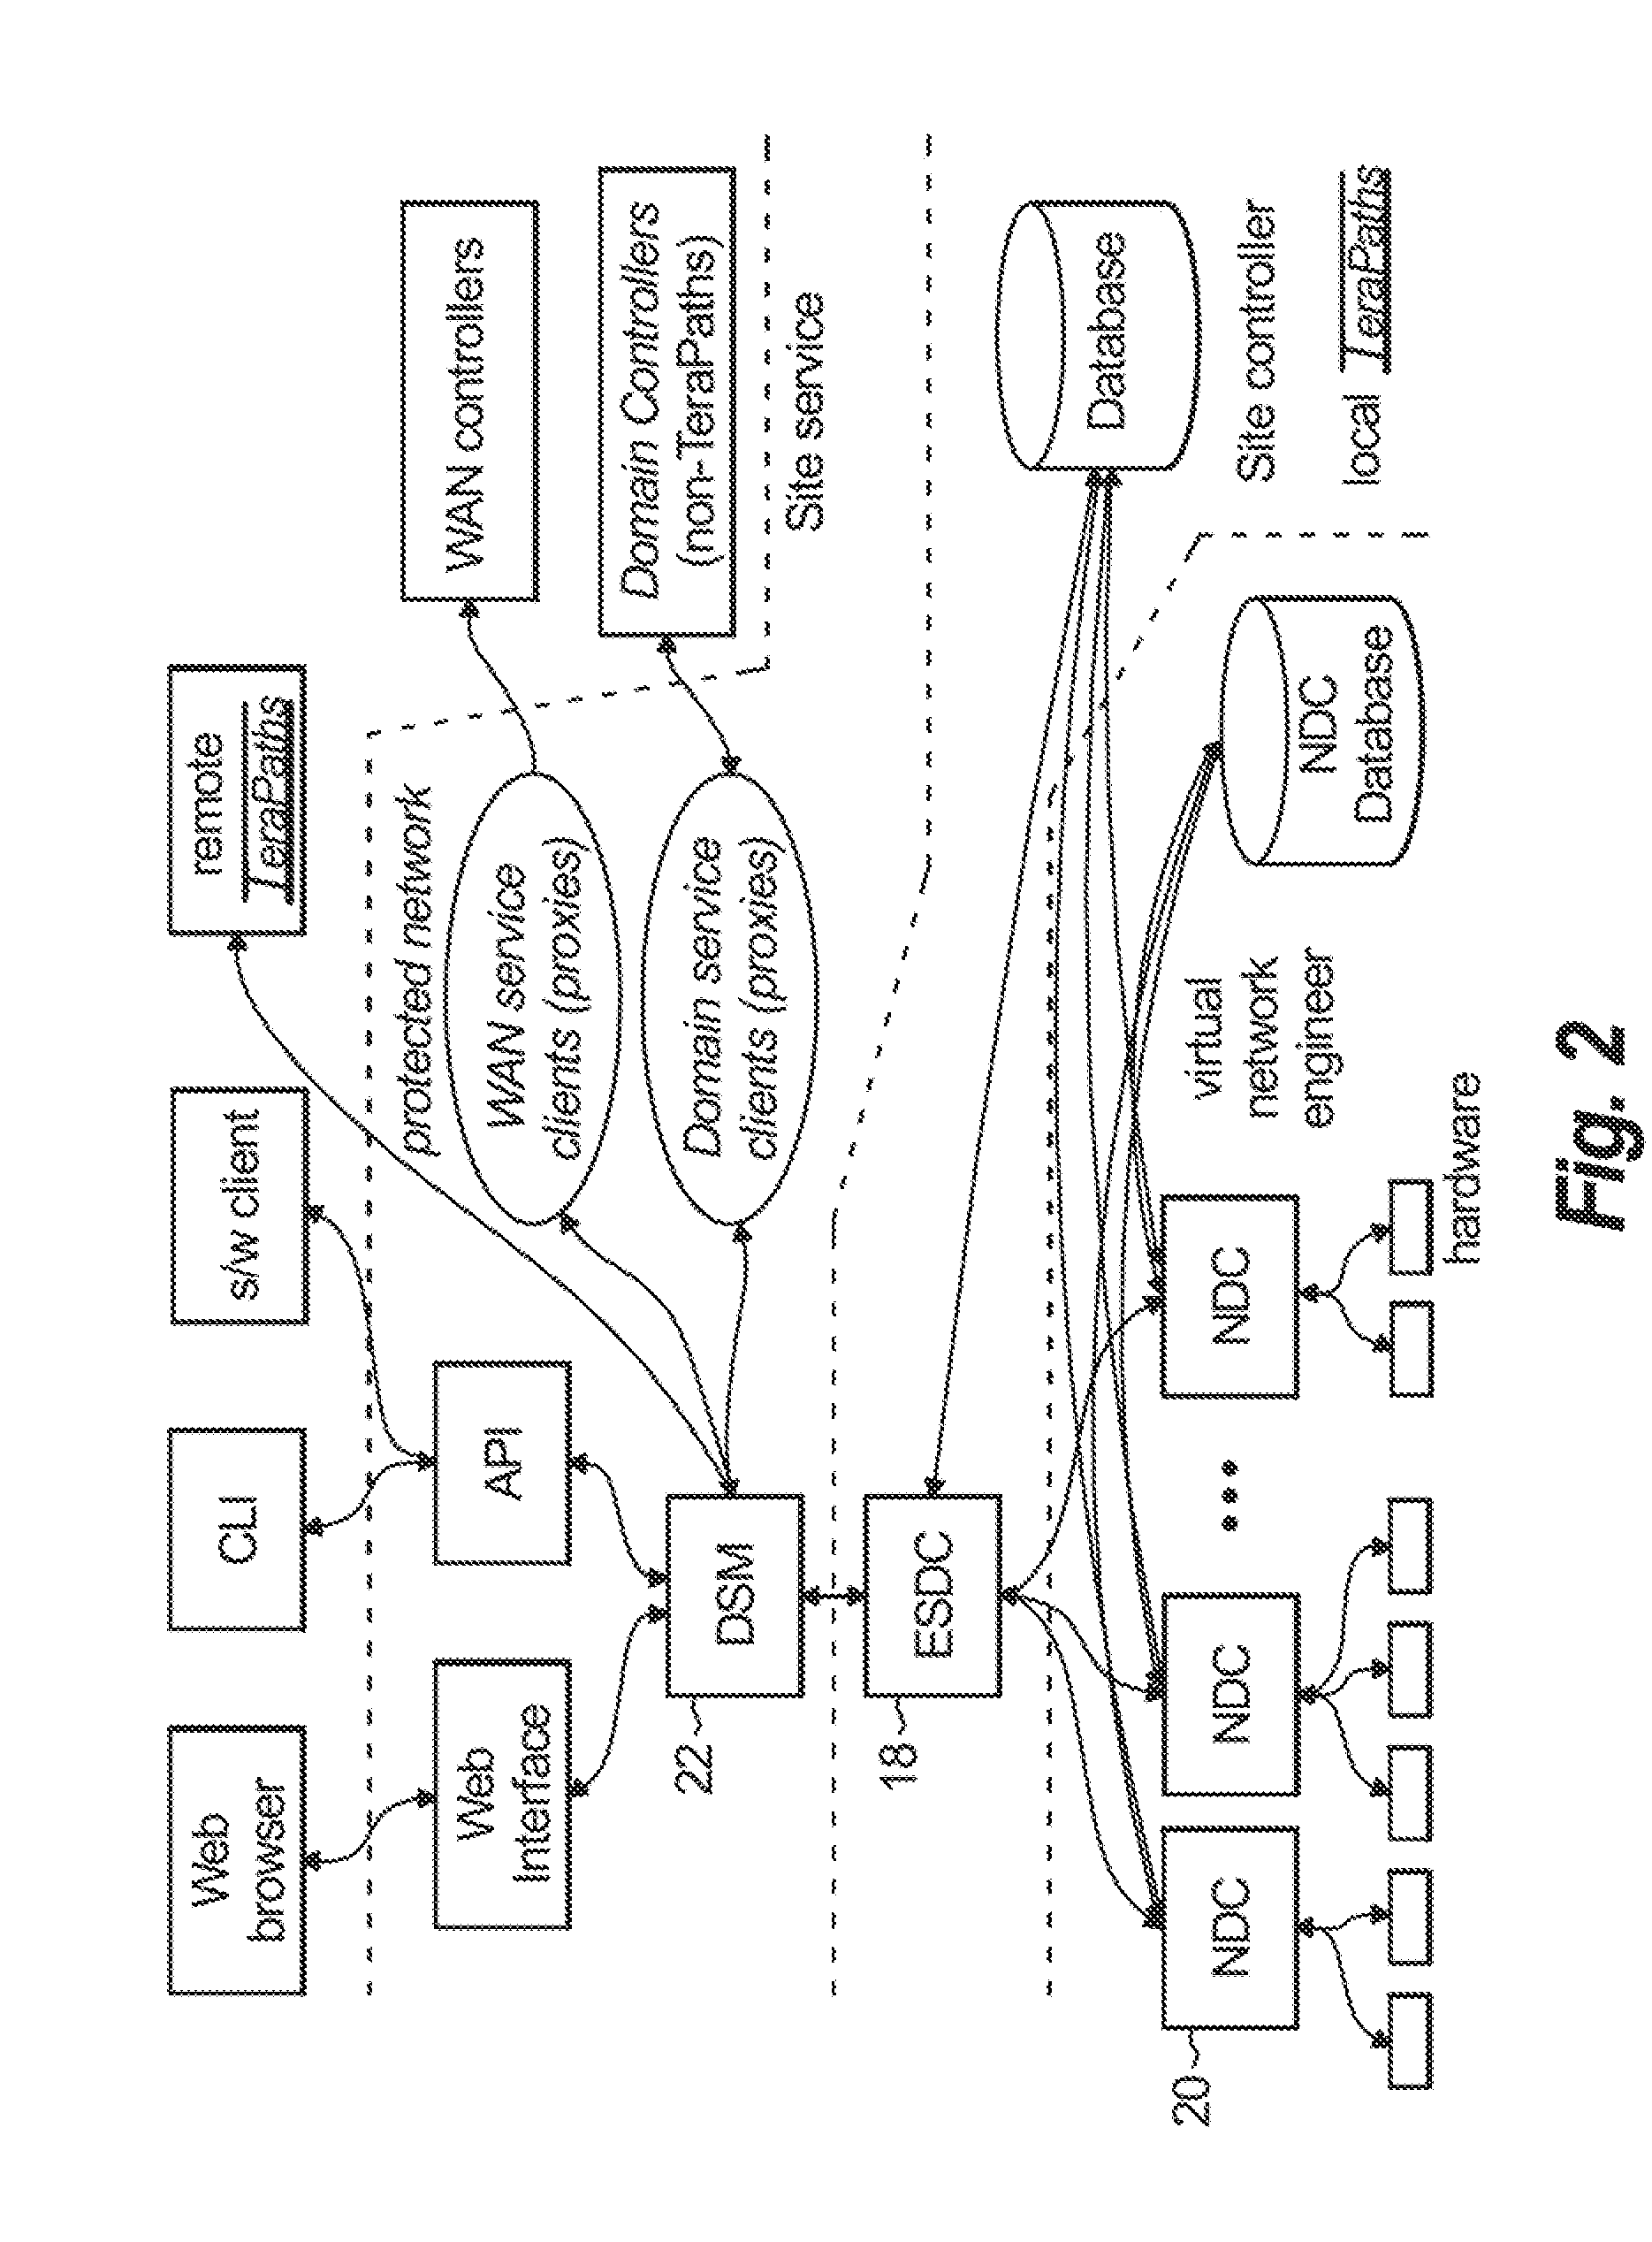 Co-Scheduling of Network Resource Provisioning and Host-to-Host Bandwidth Reservation on High-Performance Network and Storage Systems